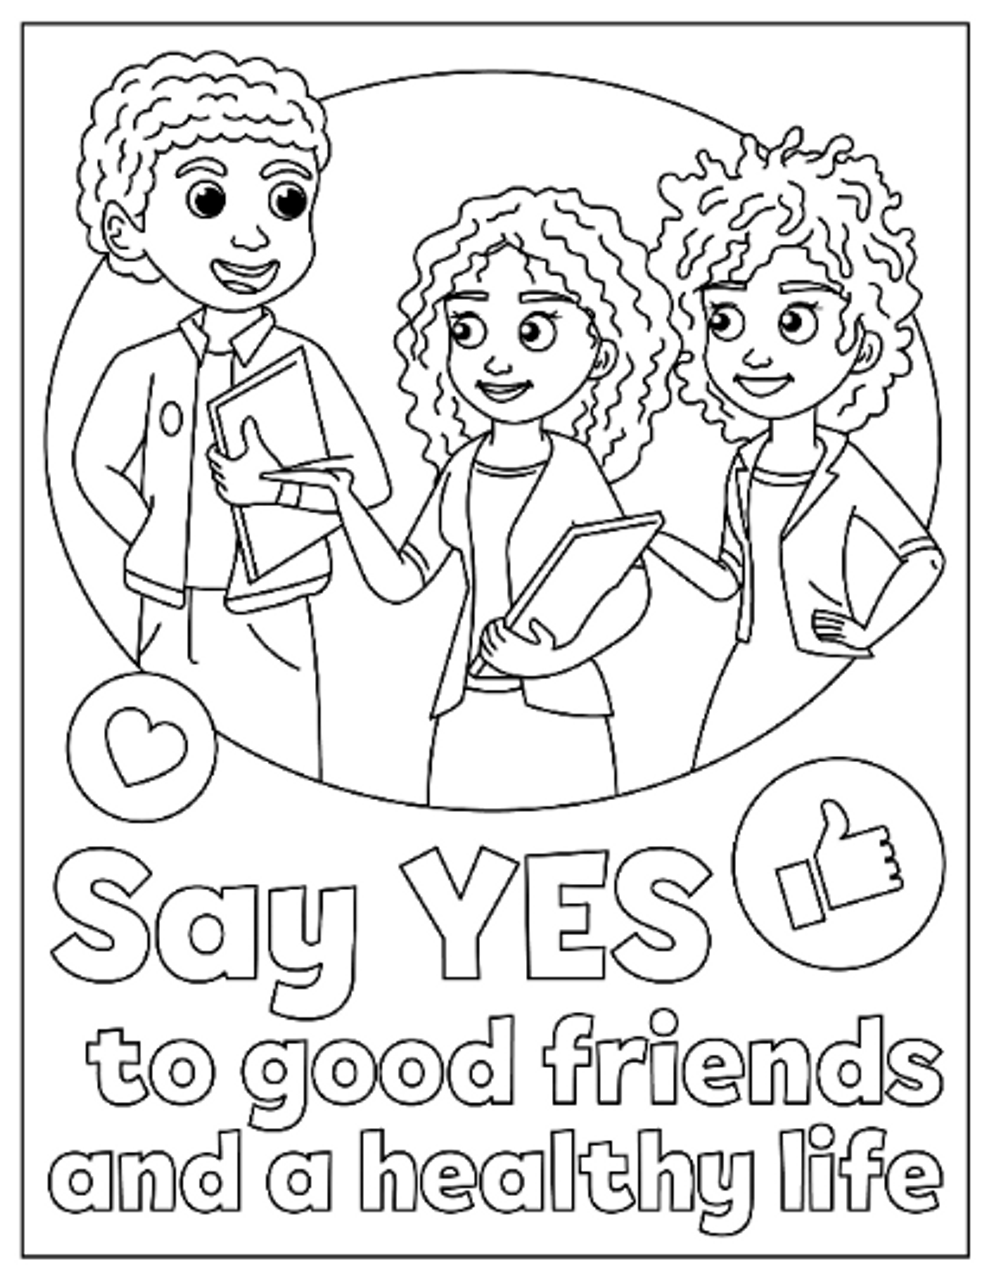 Coloring book for kids anti drug education coloring pages for kids coloring sheets for kids kids